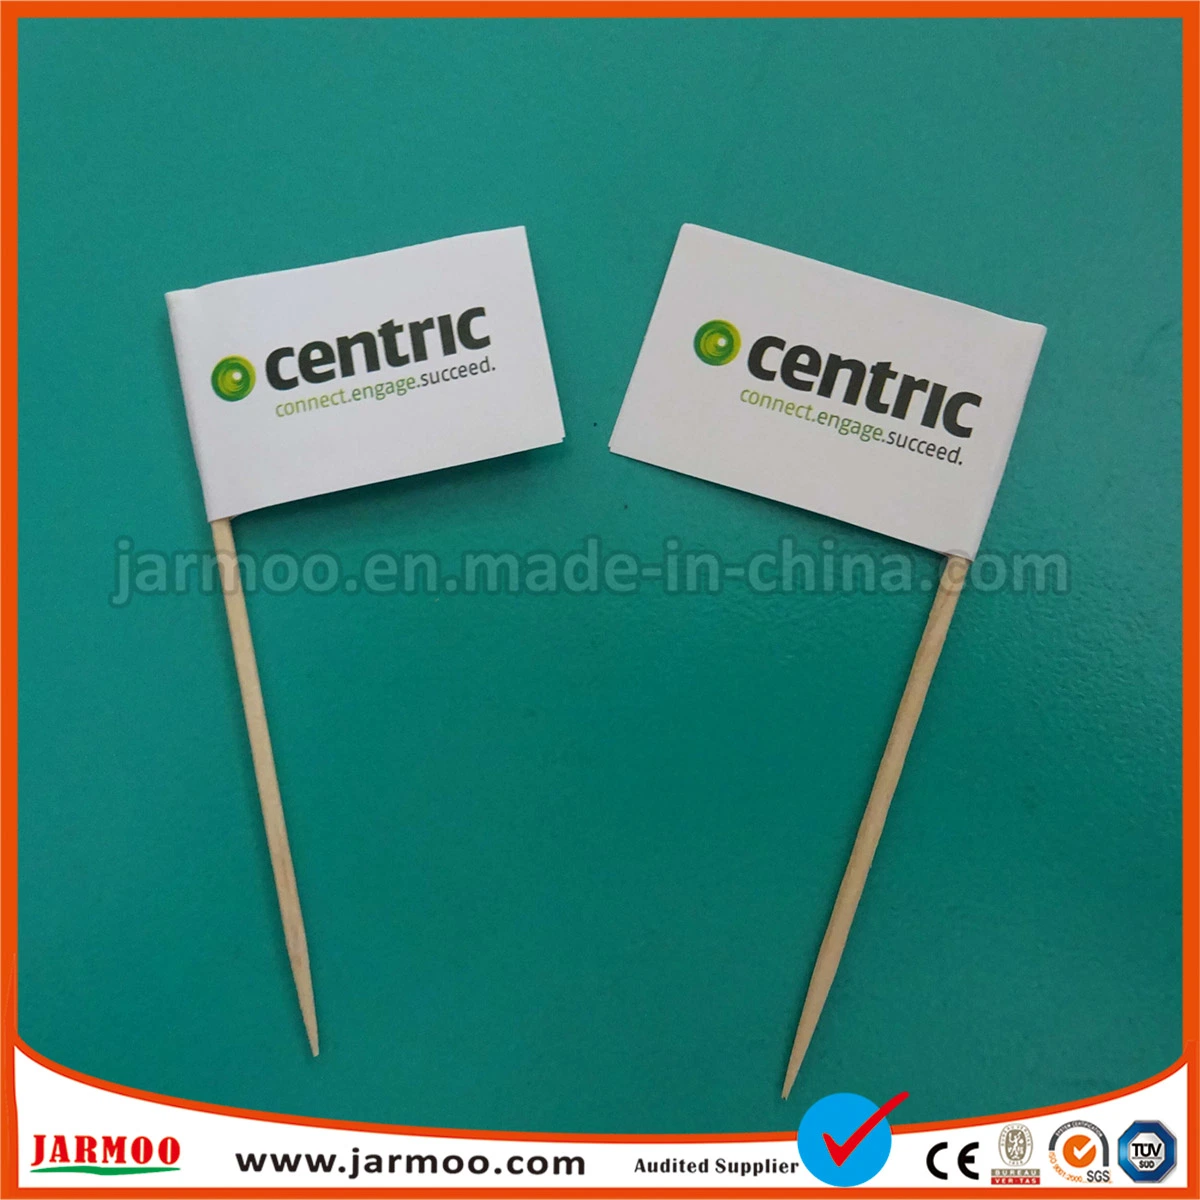 Digital Printed Bamboo Toothpick Paper Flag